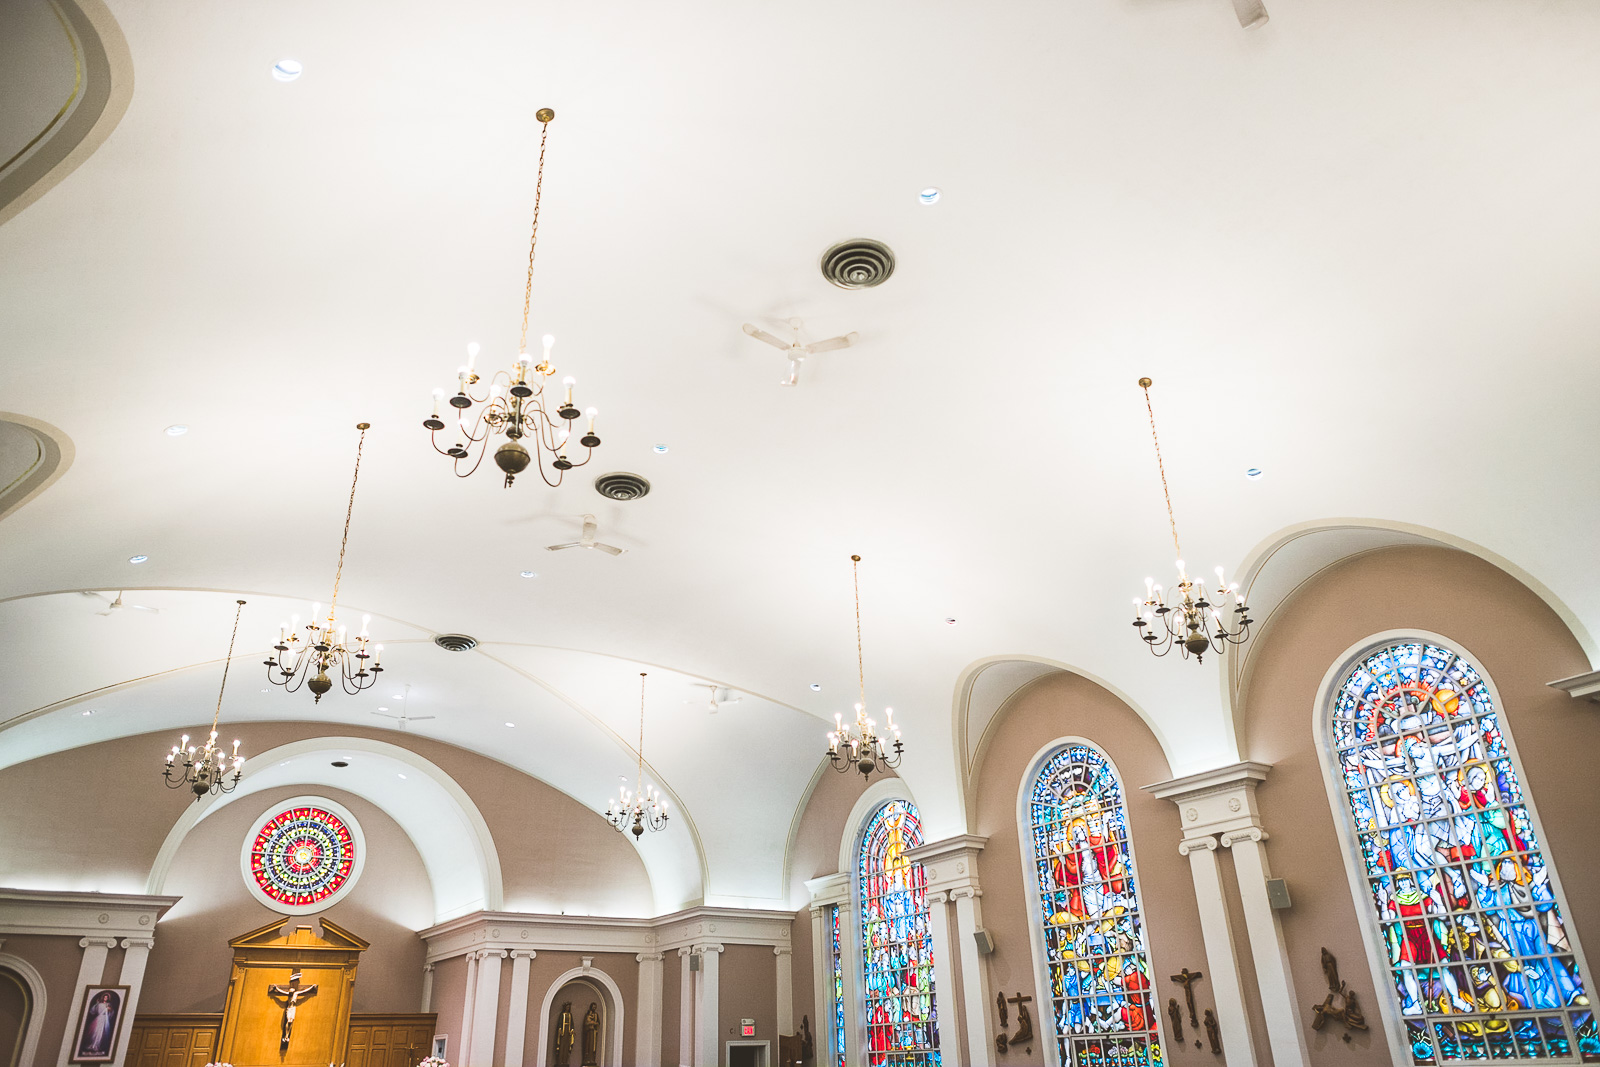 27 inside church ceiling - Kristina + Dave // Wedding Photographer in Chicago